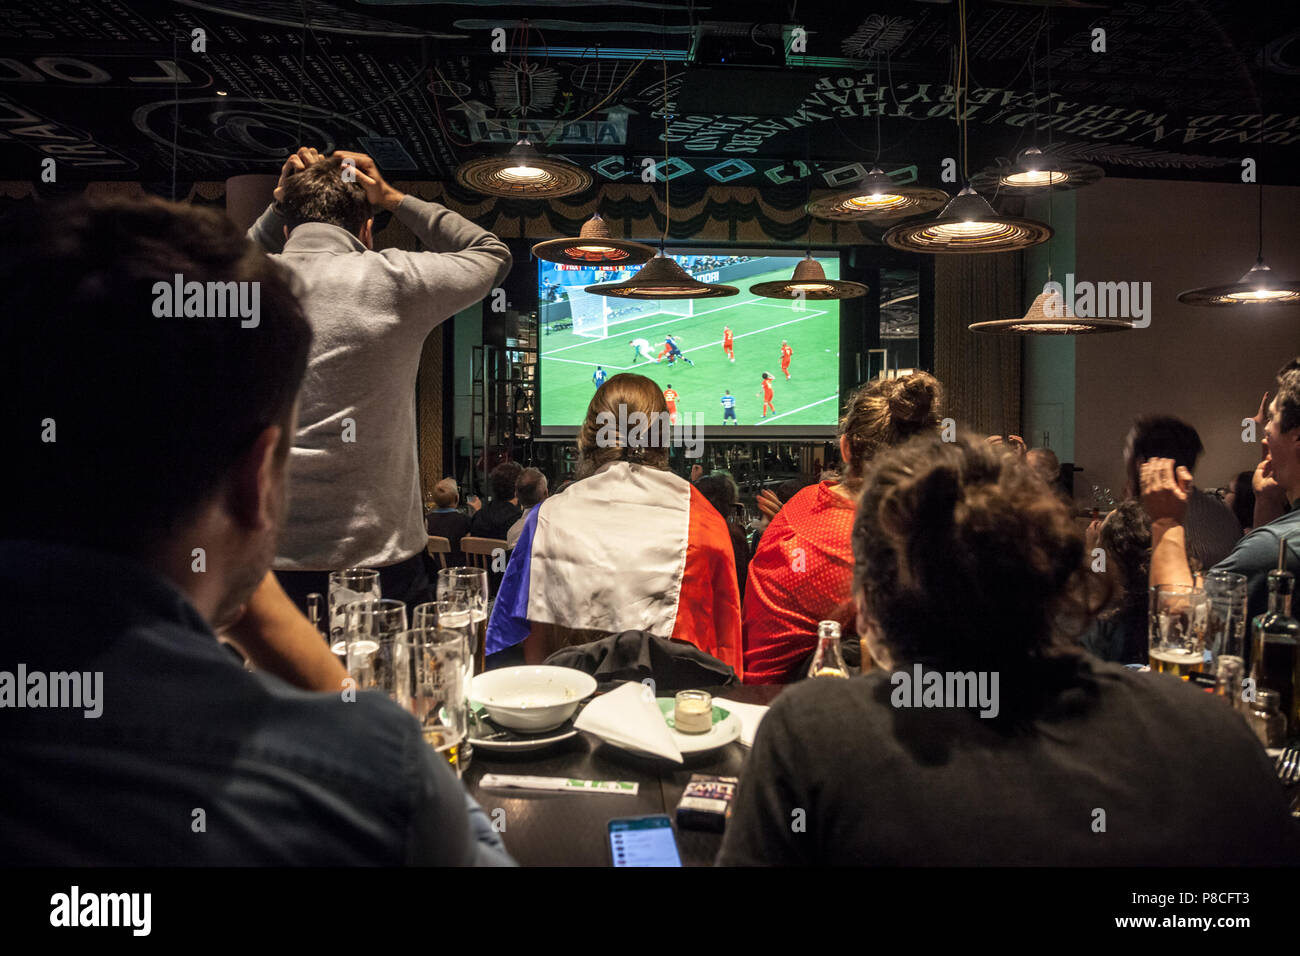 Picture of a group of French supporters in a restaurant watching on a giant screen the semi final match France belgium, during the 2018 FIFA World Cup,, which saw the victory of French team. The 2018 FIFA World Cup is the 21st FIFA World Cup, an international football tournament contested by the men's national teams of the member associations of FIFA once every four years. It is currently ongoing in Russia starting from 14 June and will end with the final match on 15 July 2018 Stock Photo